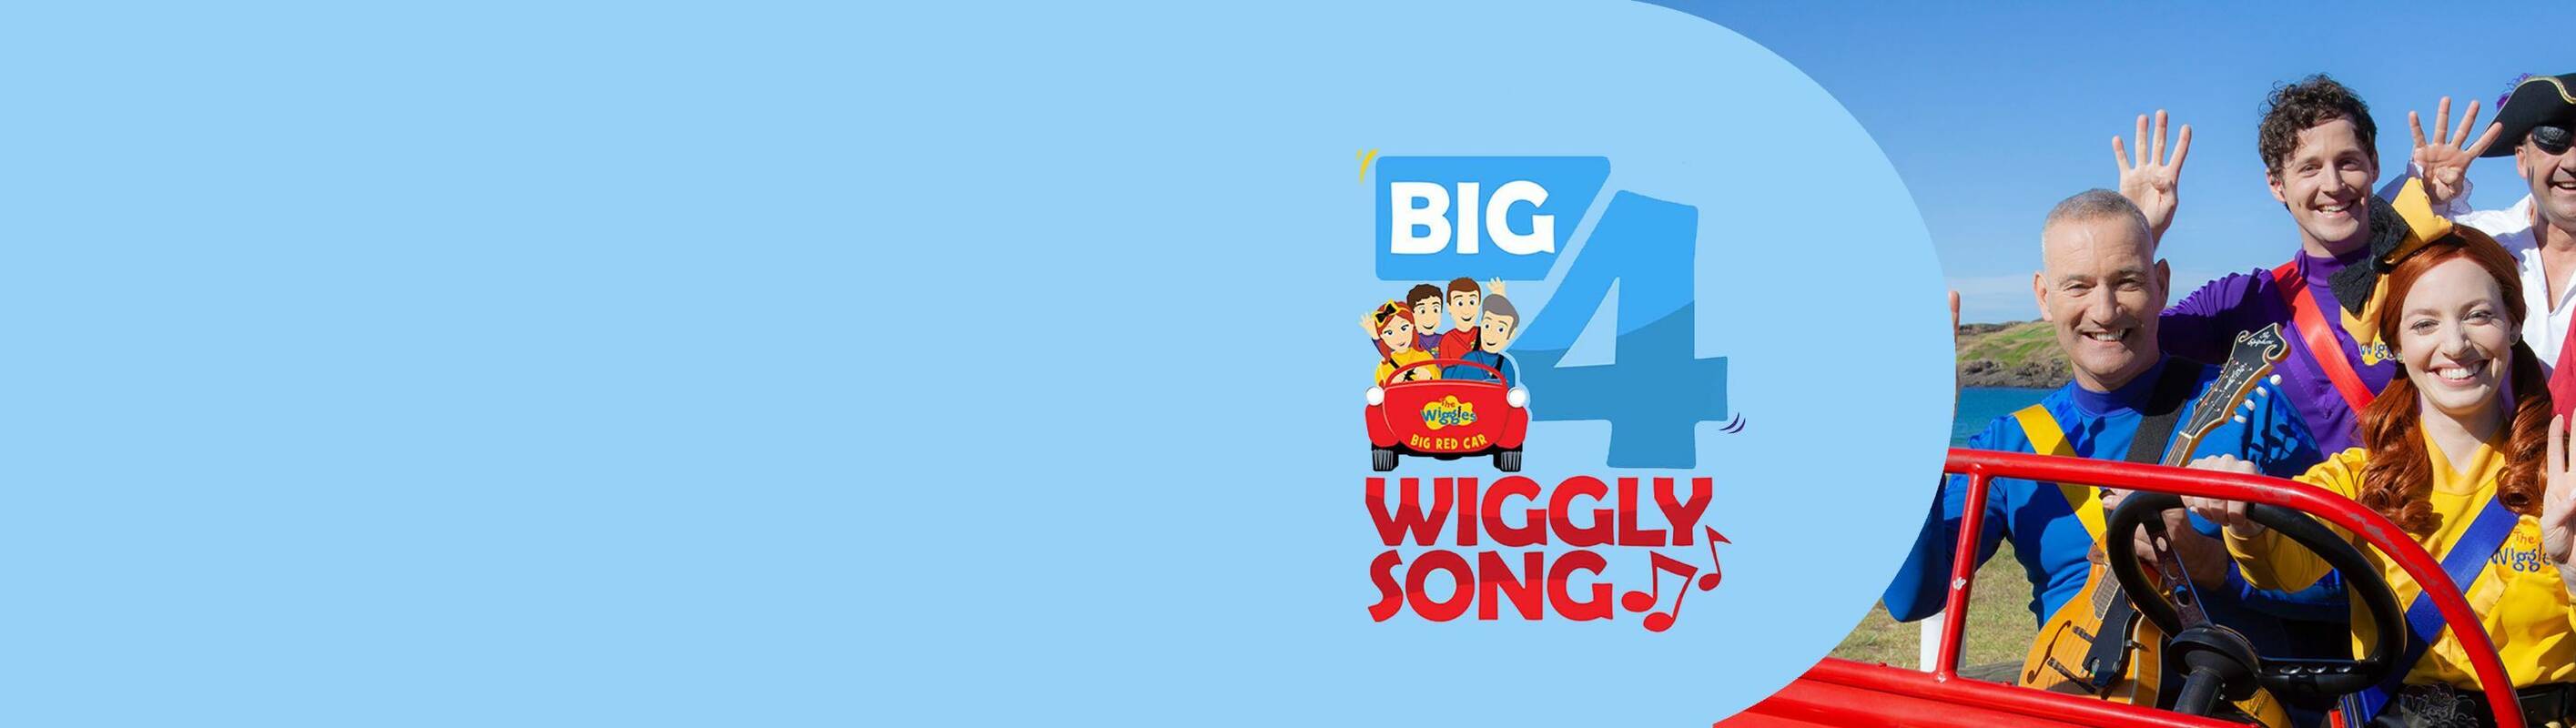 The Wiggles waving and smiling in a red car